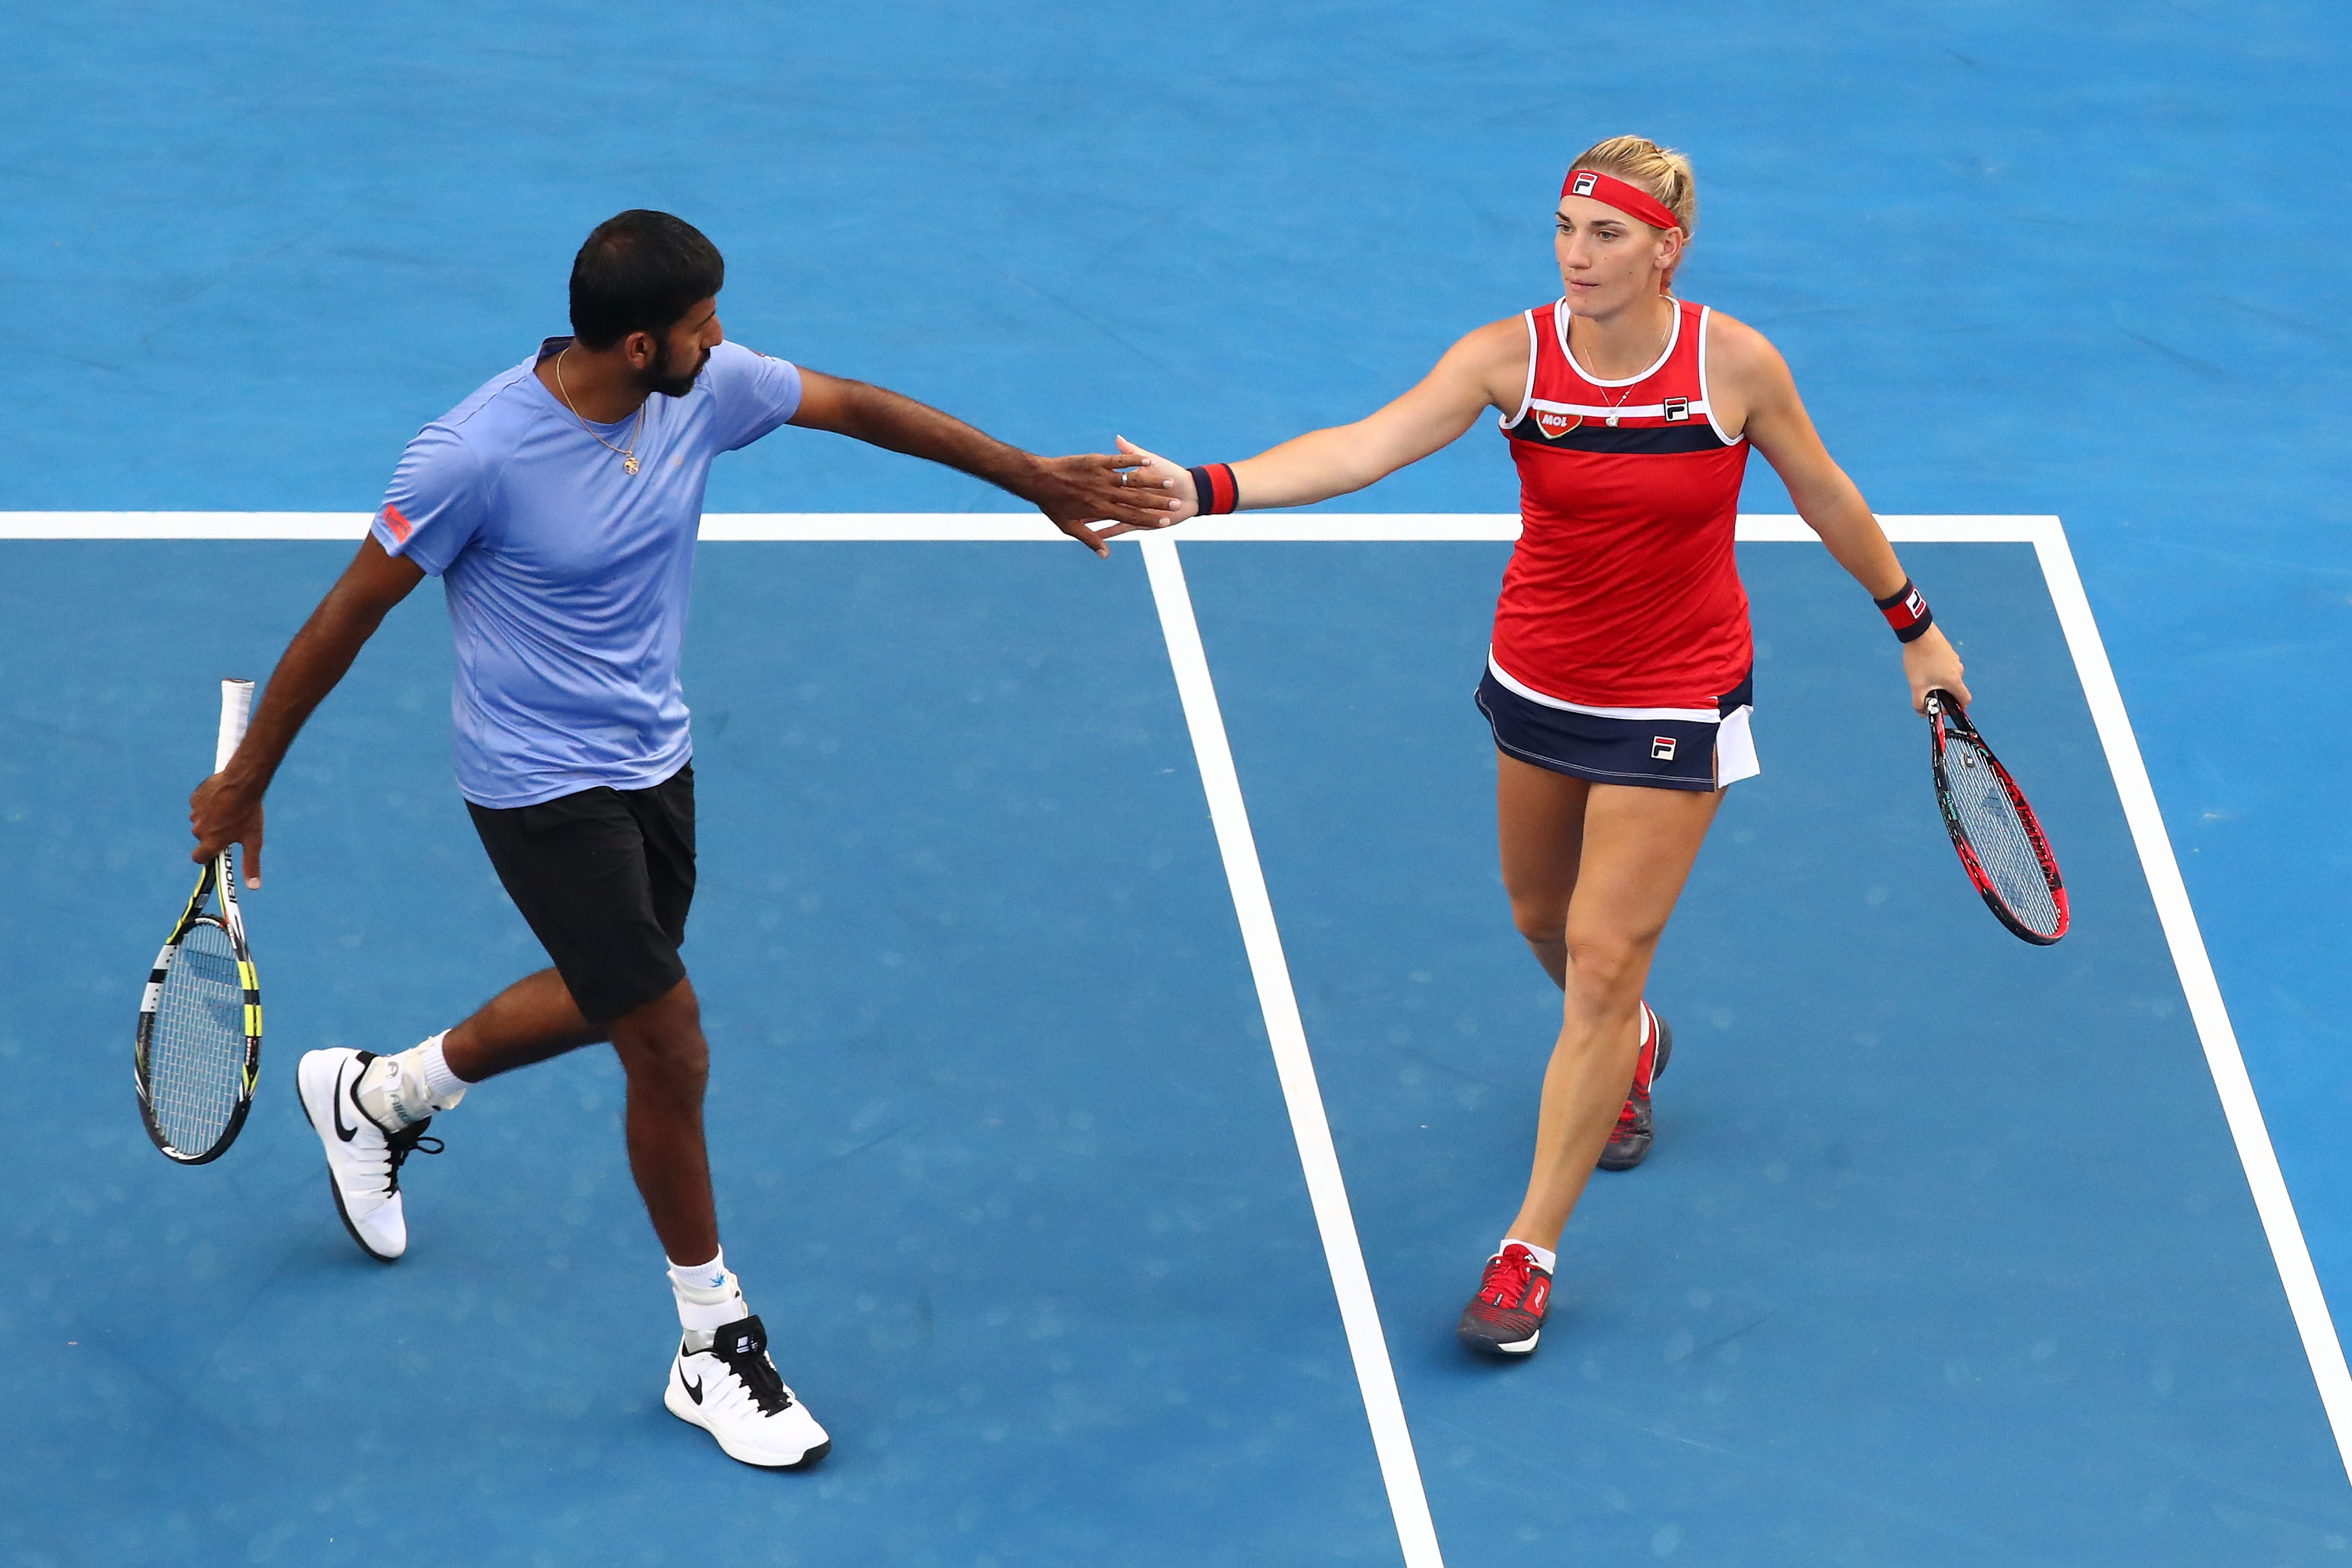 Australian Open | Bopanna-Babos enter mixed doubles QF; Nadal concedes match mid-way due to leg injury